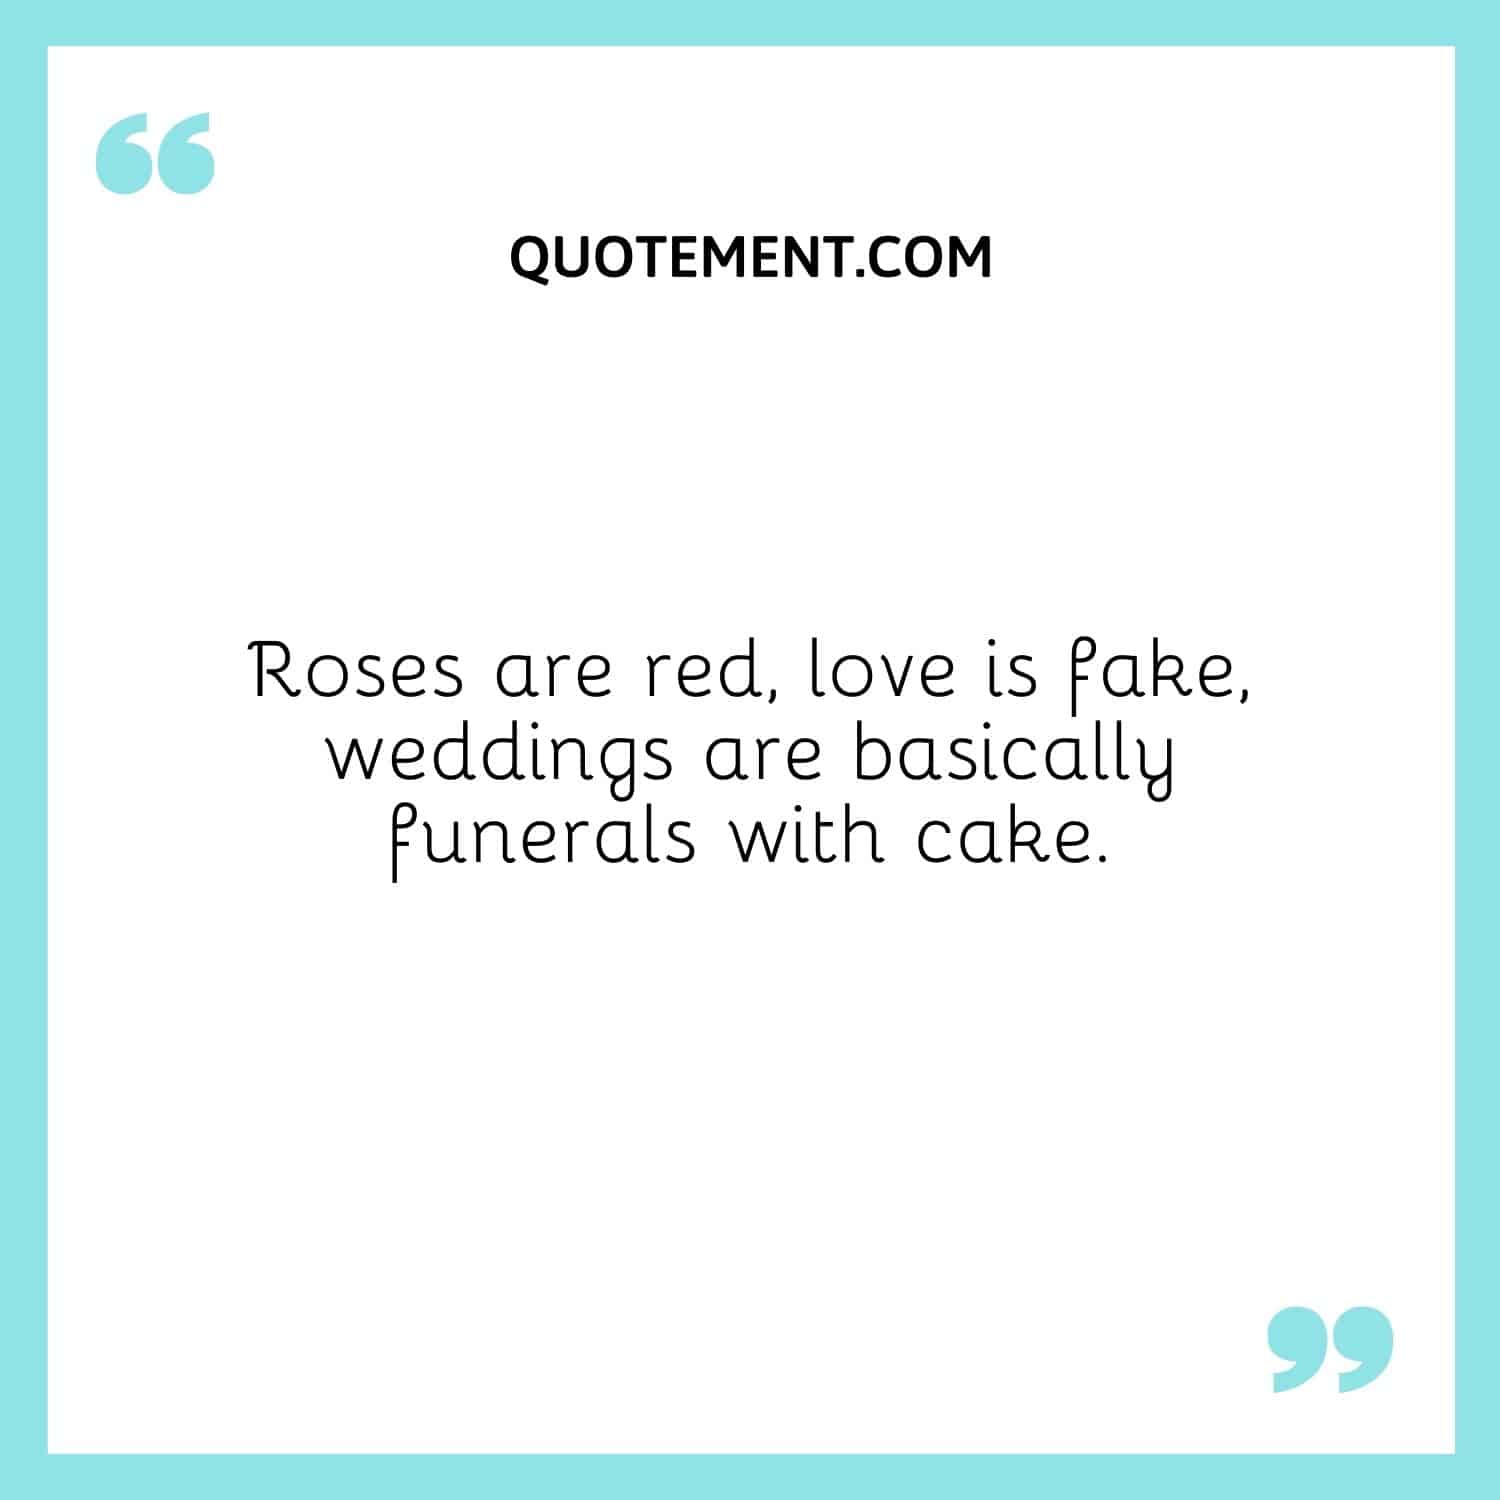 Roses are red, love is fake, weddings are basically funerals with cake.